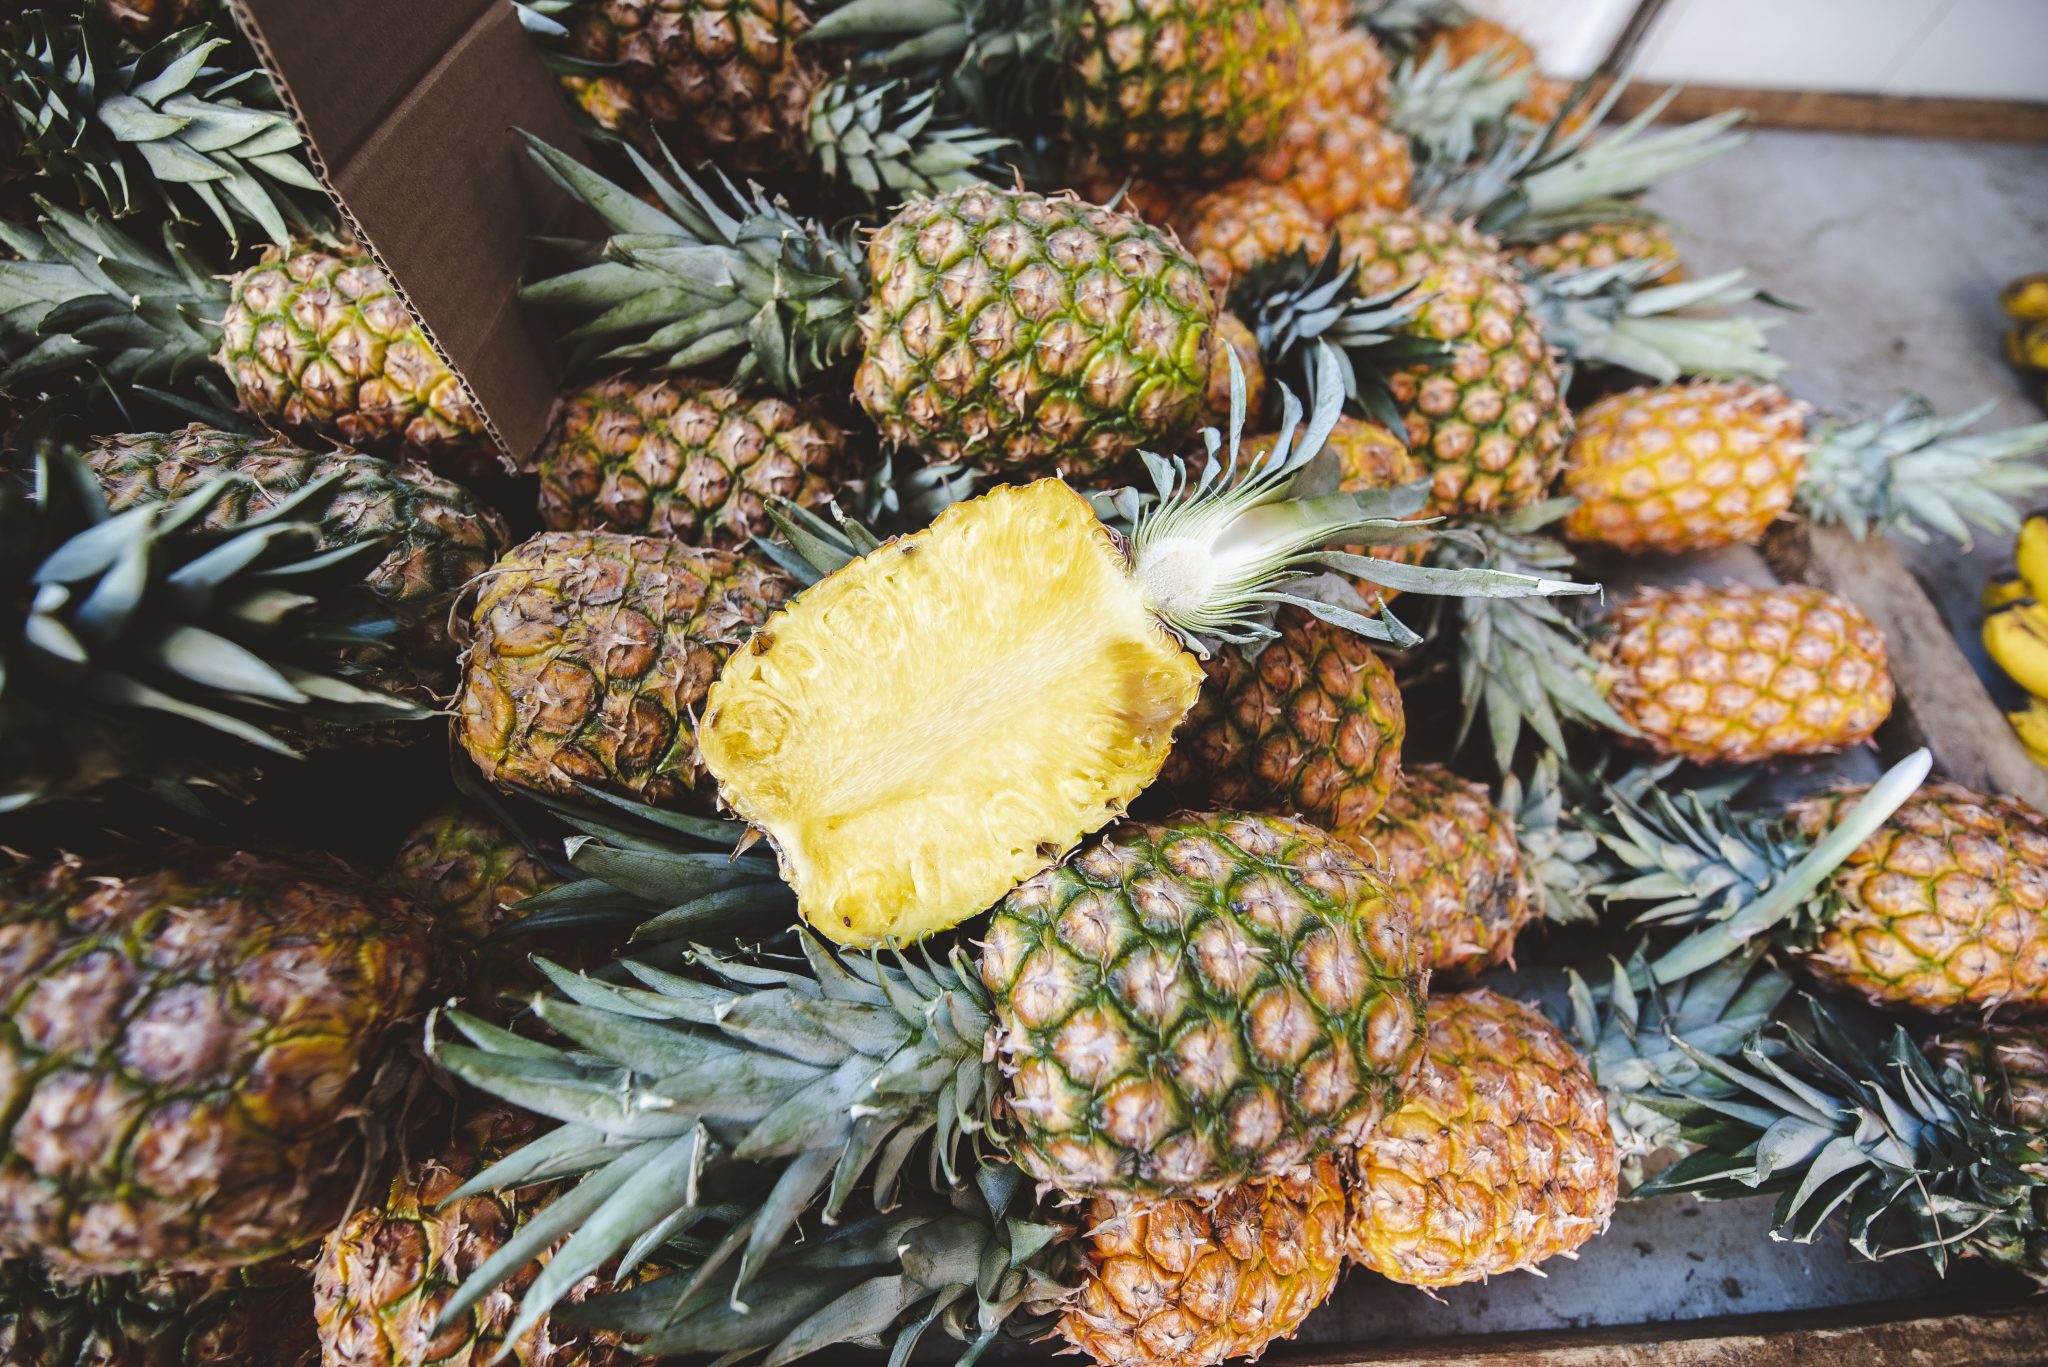 Parable of the pineapple